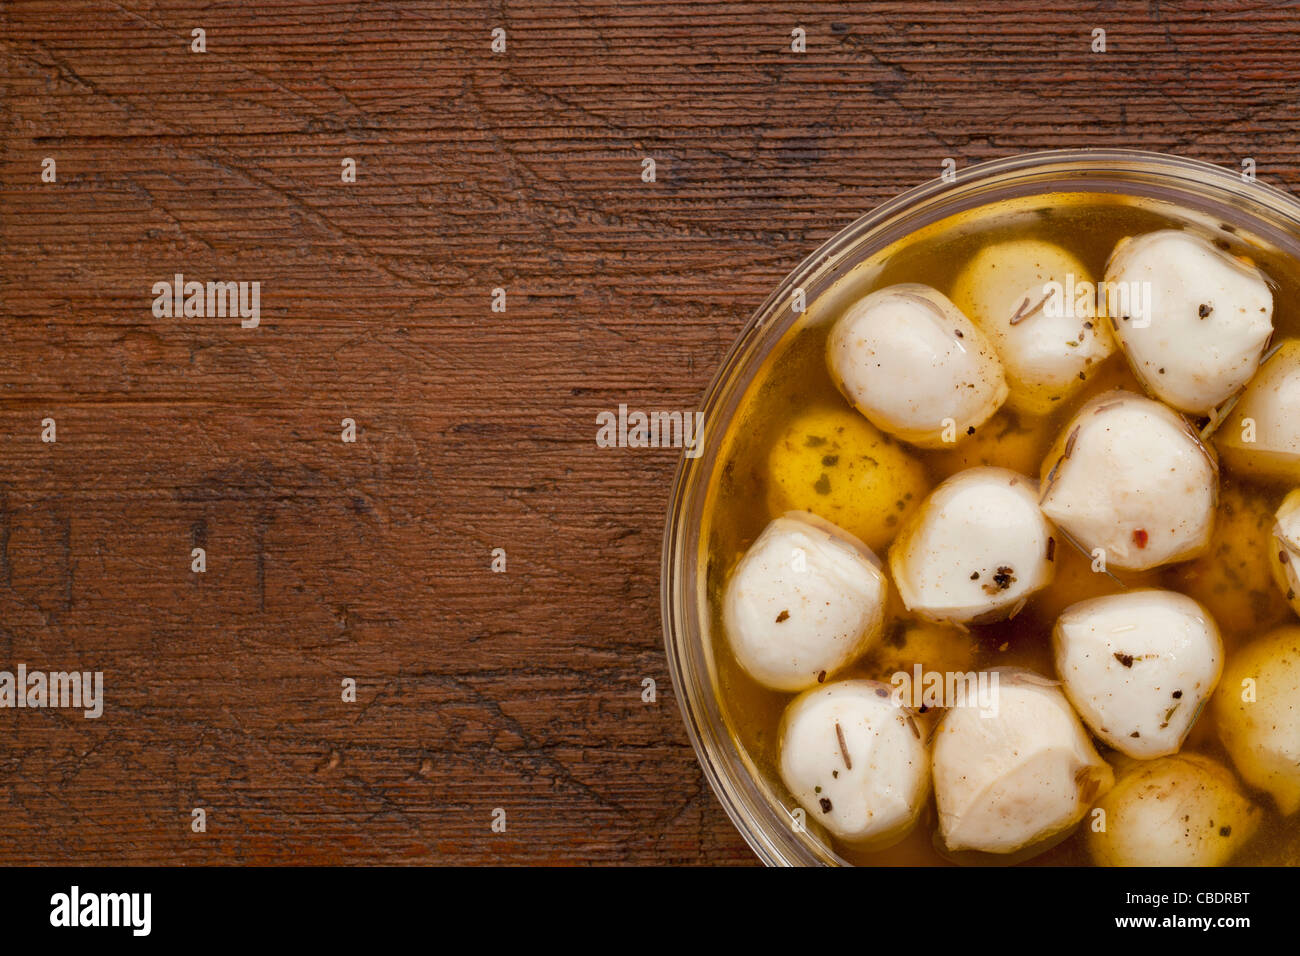 balls of mozzarella cheese marinated in oil with seasoning, glass bowl on weathered wood background Stock Photo